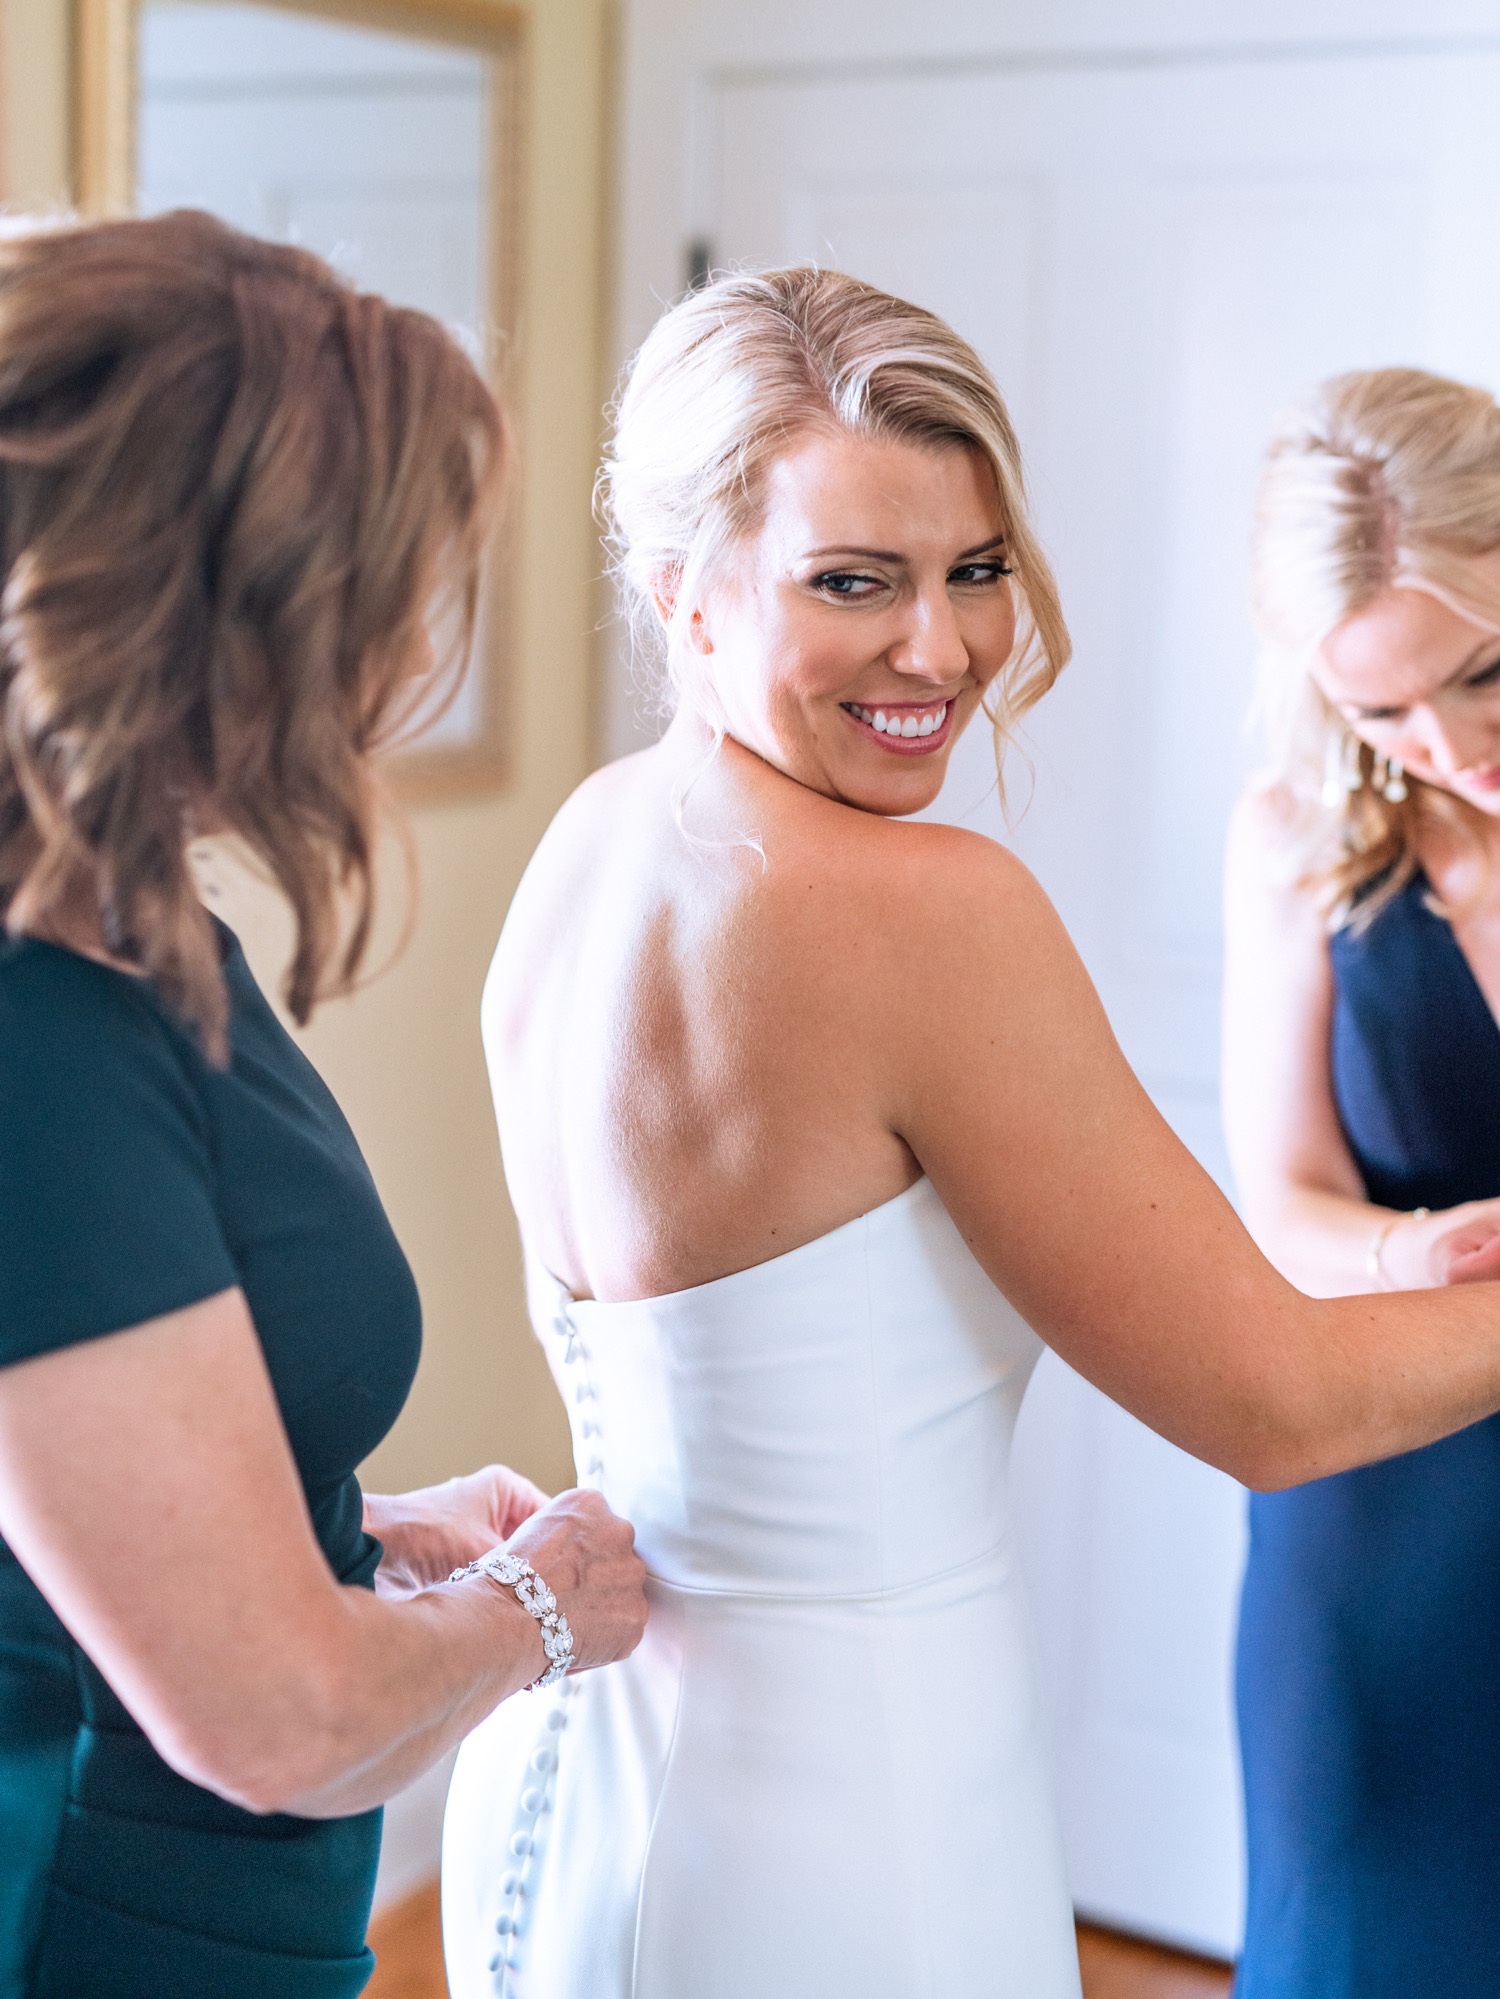 Bride finishes putting her wedding dress on and gets help from mother and maid of honor to button her dress and bracelet before the ceremony in Richmond, Virginia